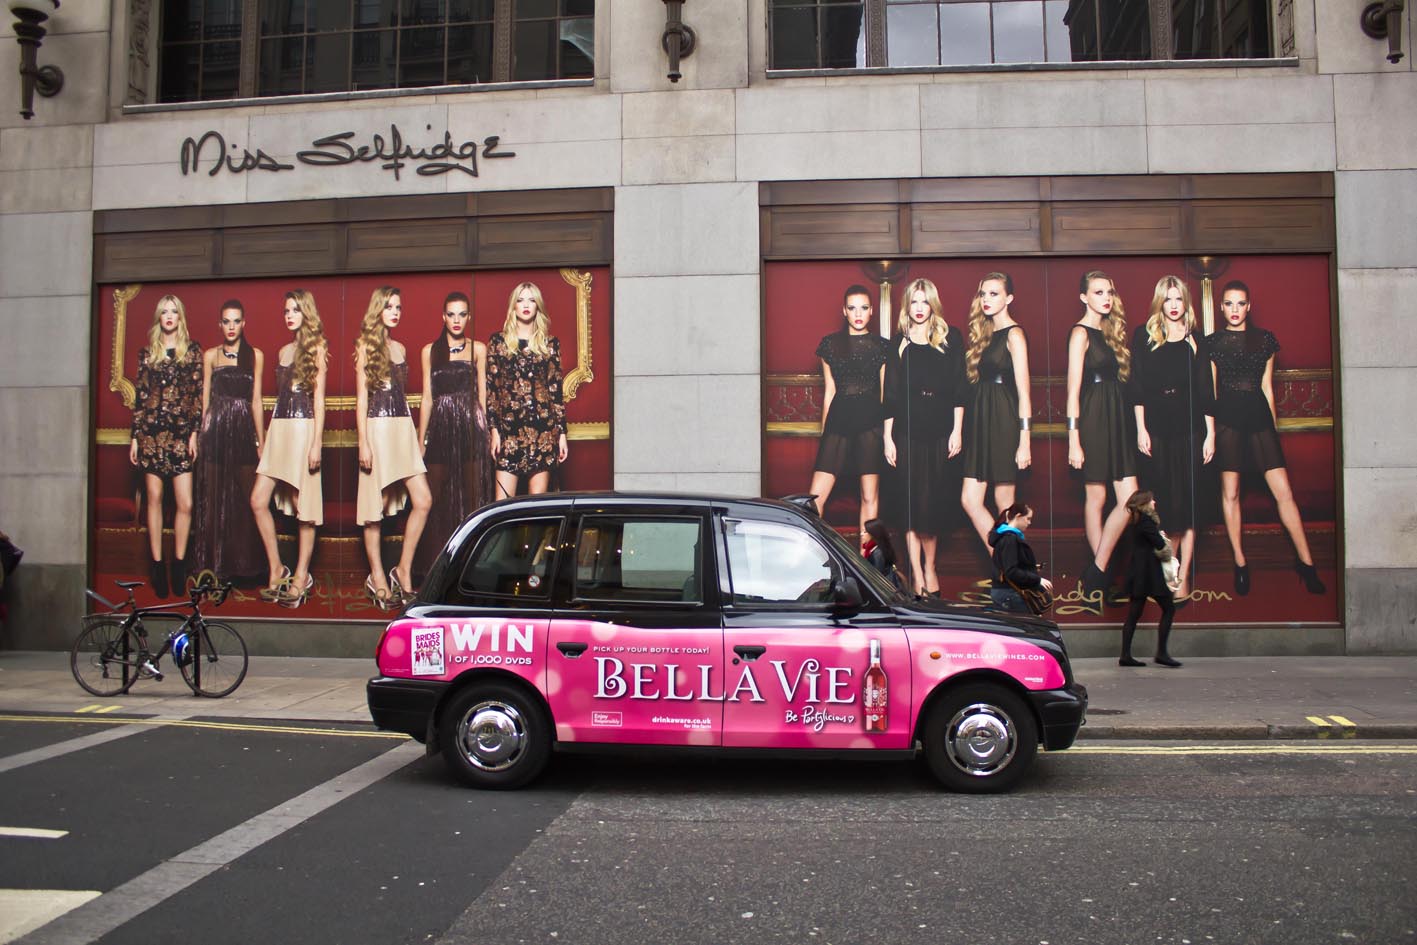 2011 Ubiquitous taxi advertising campaign for Bella Vie - Be Partylicious